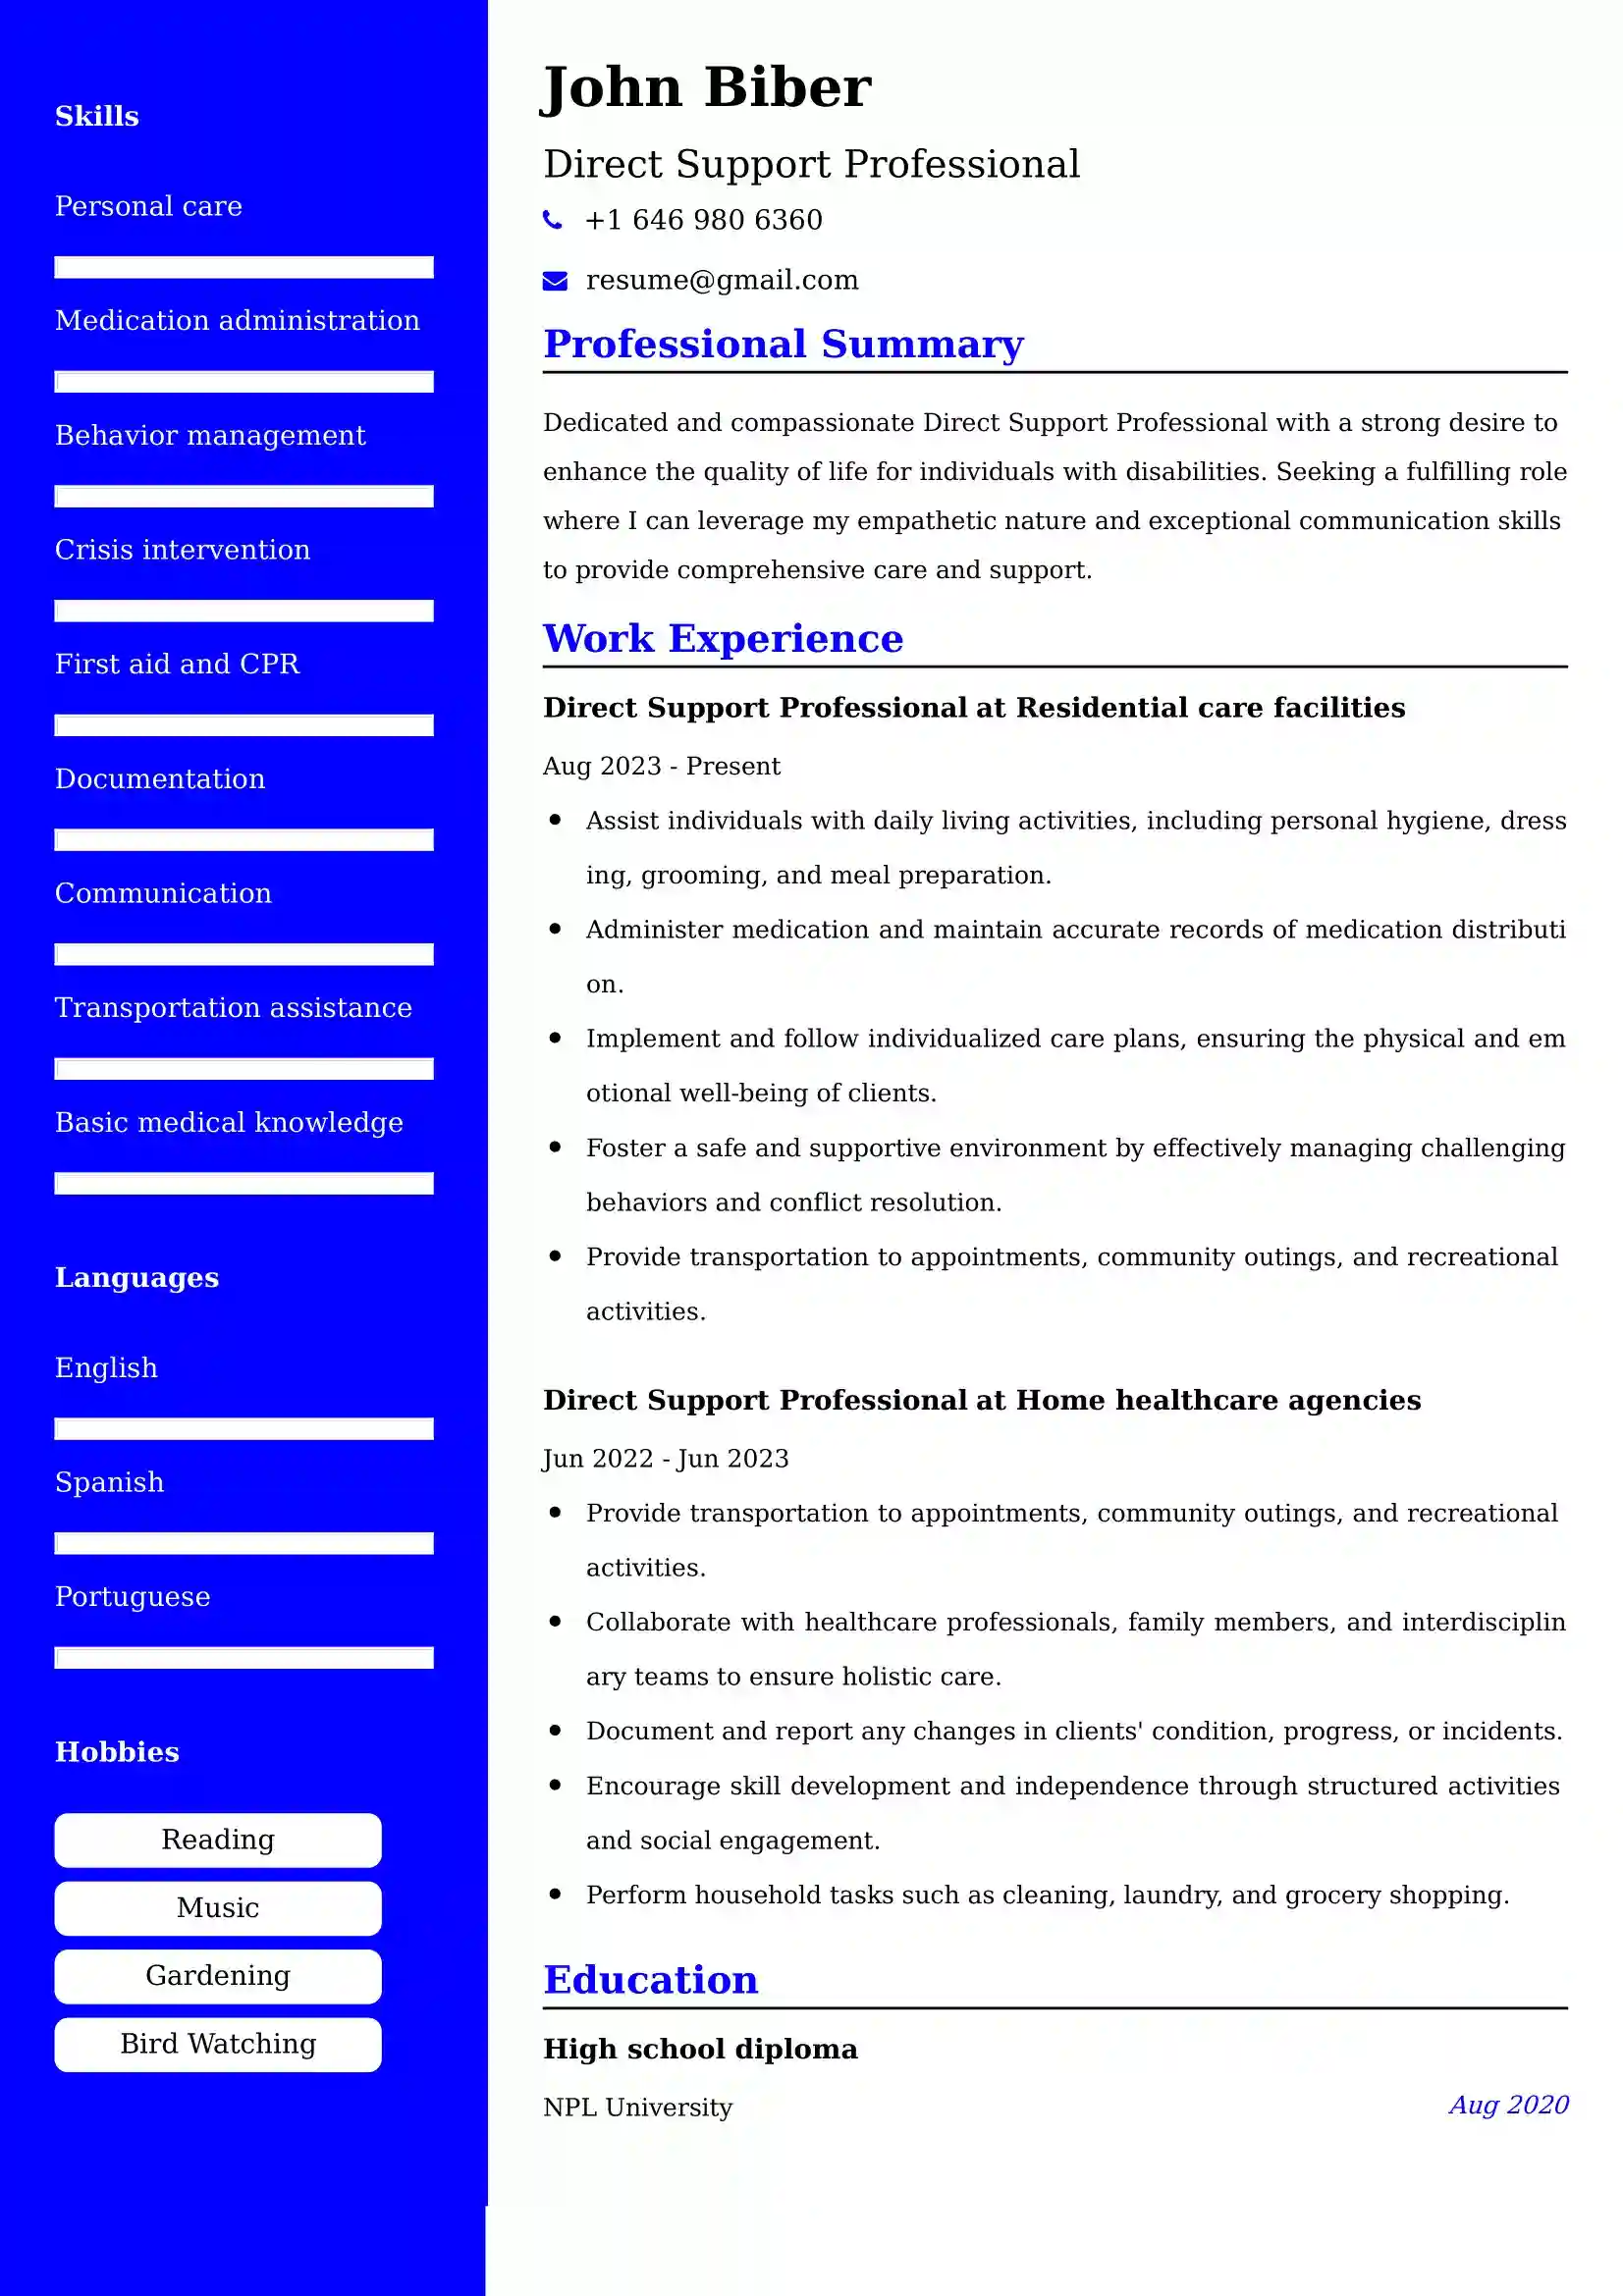 Best Healthcare System Administrator Resume Examples for UK